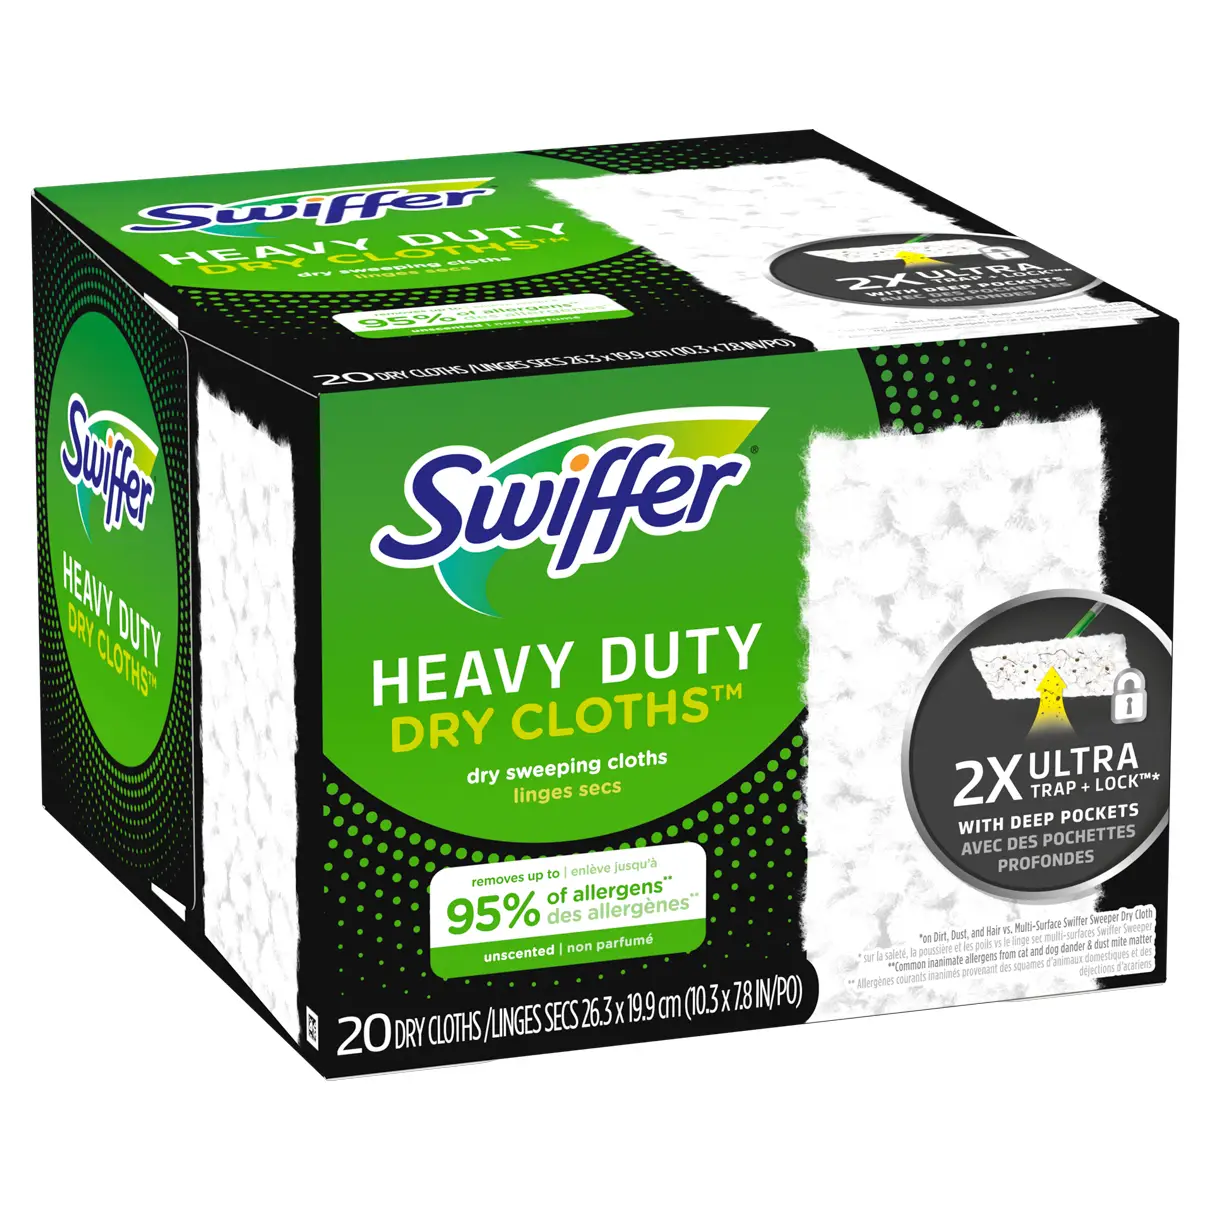 Swiffer Sweeper Dry Sweeping Cloth Refills, Unscented, 32 count